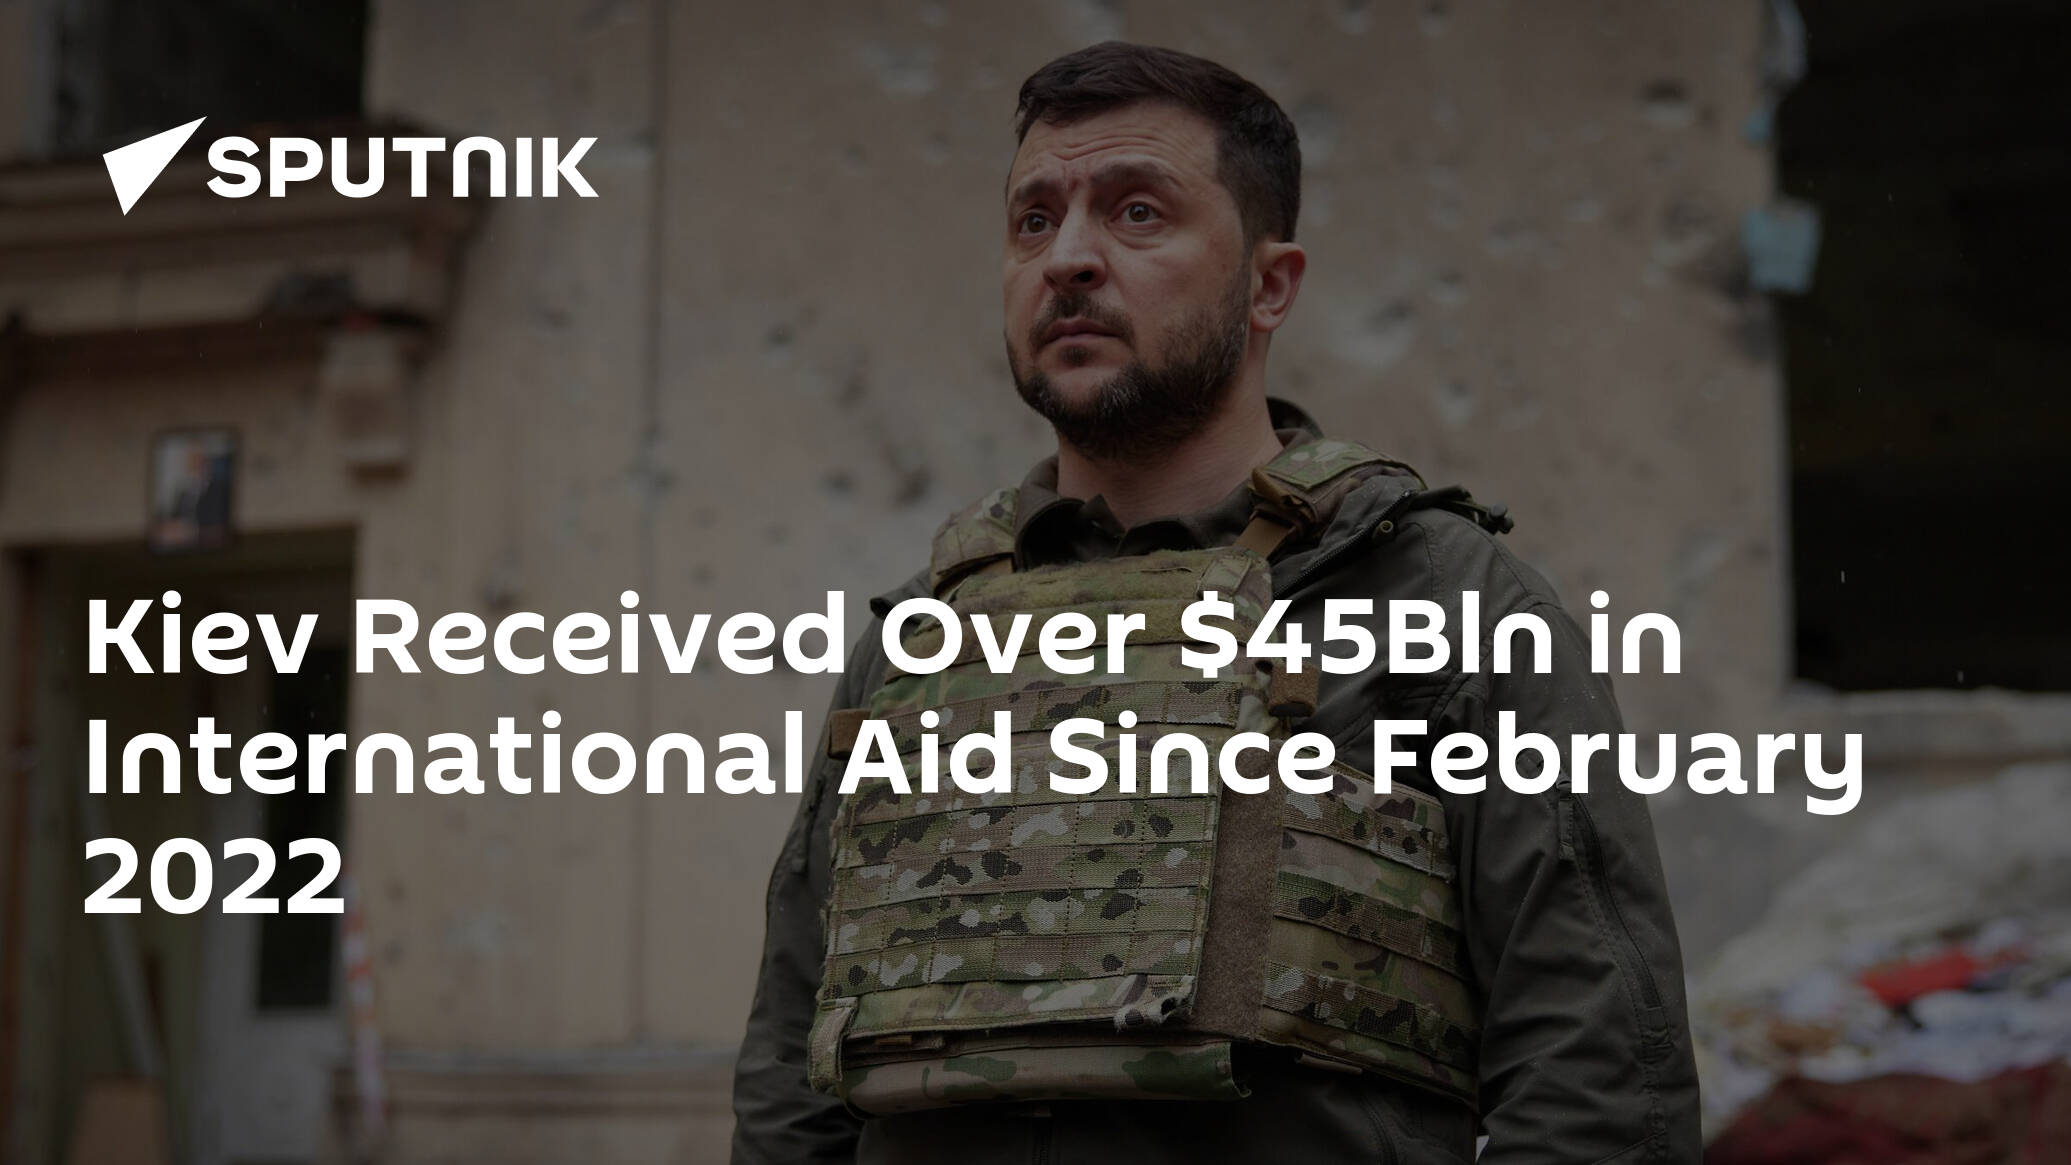 Kiev Received Over Bln in International Aid Since February 2022